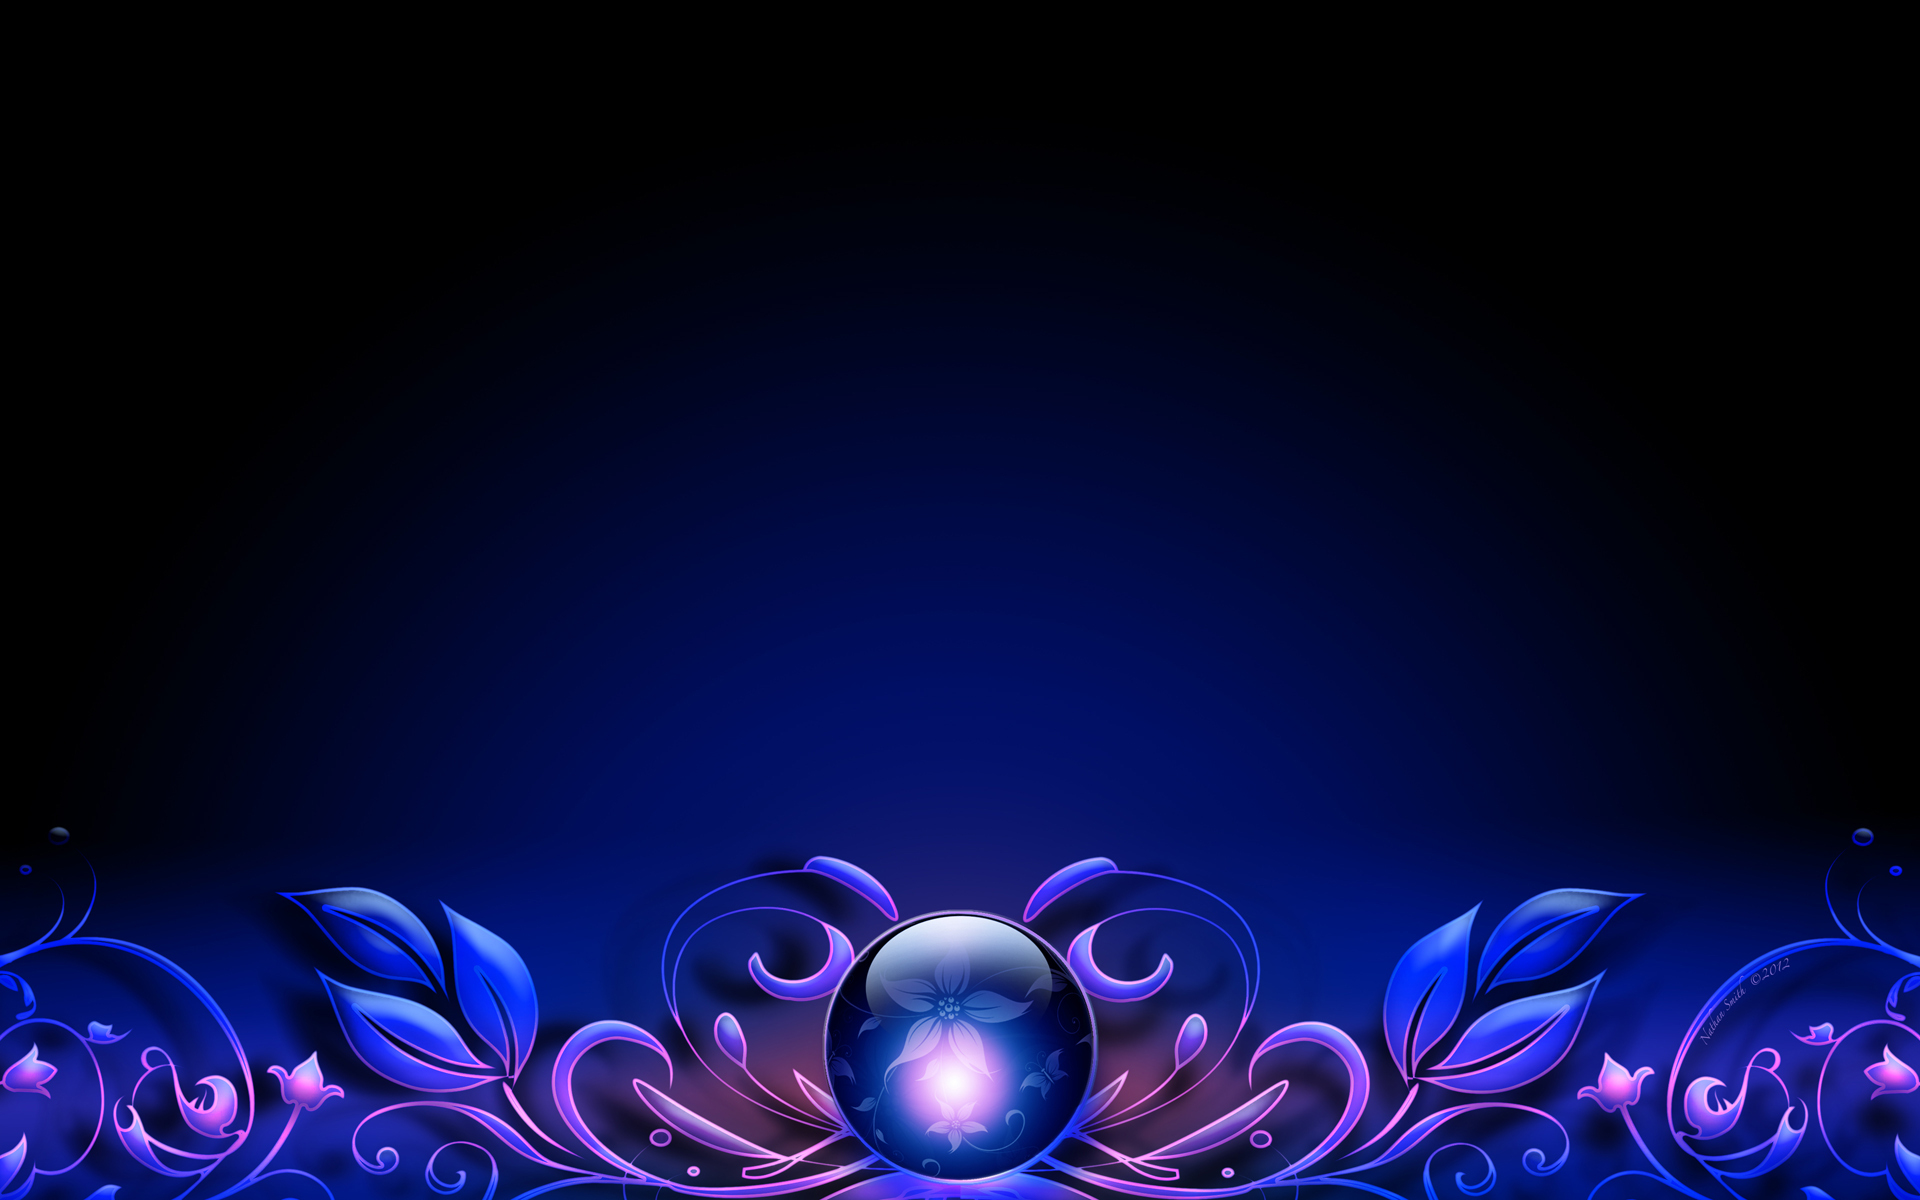 Crystal Ball Flowers Border Wallpapers HD